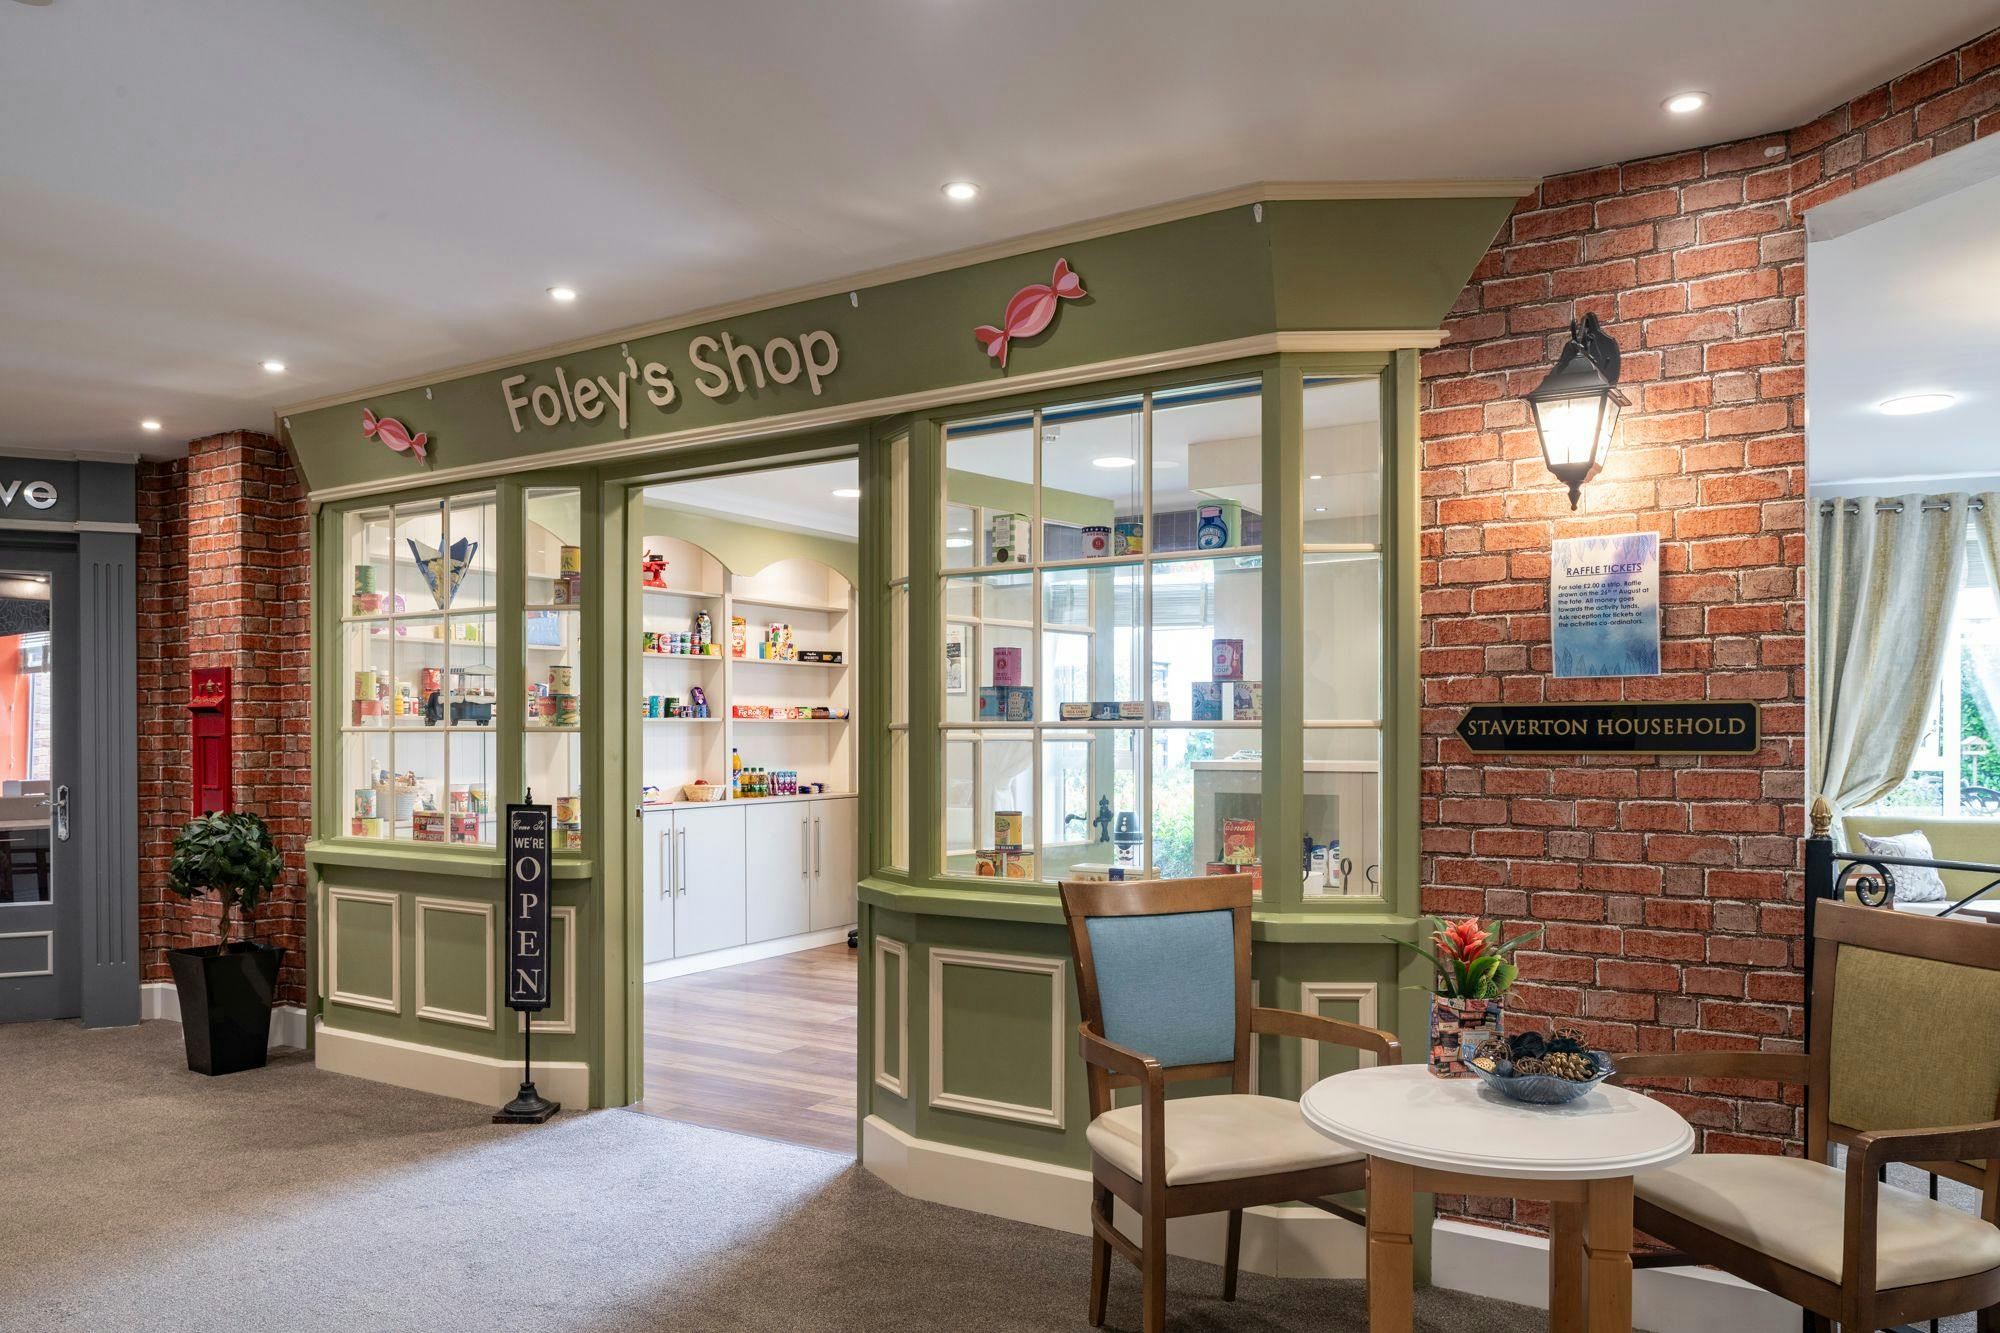 Shop at Goodson Lodge in Care Home in Trowbridge, Wiltshire